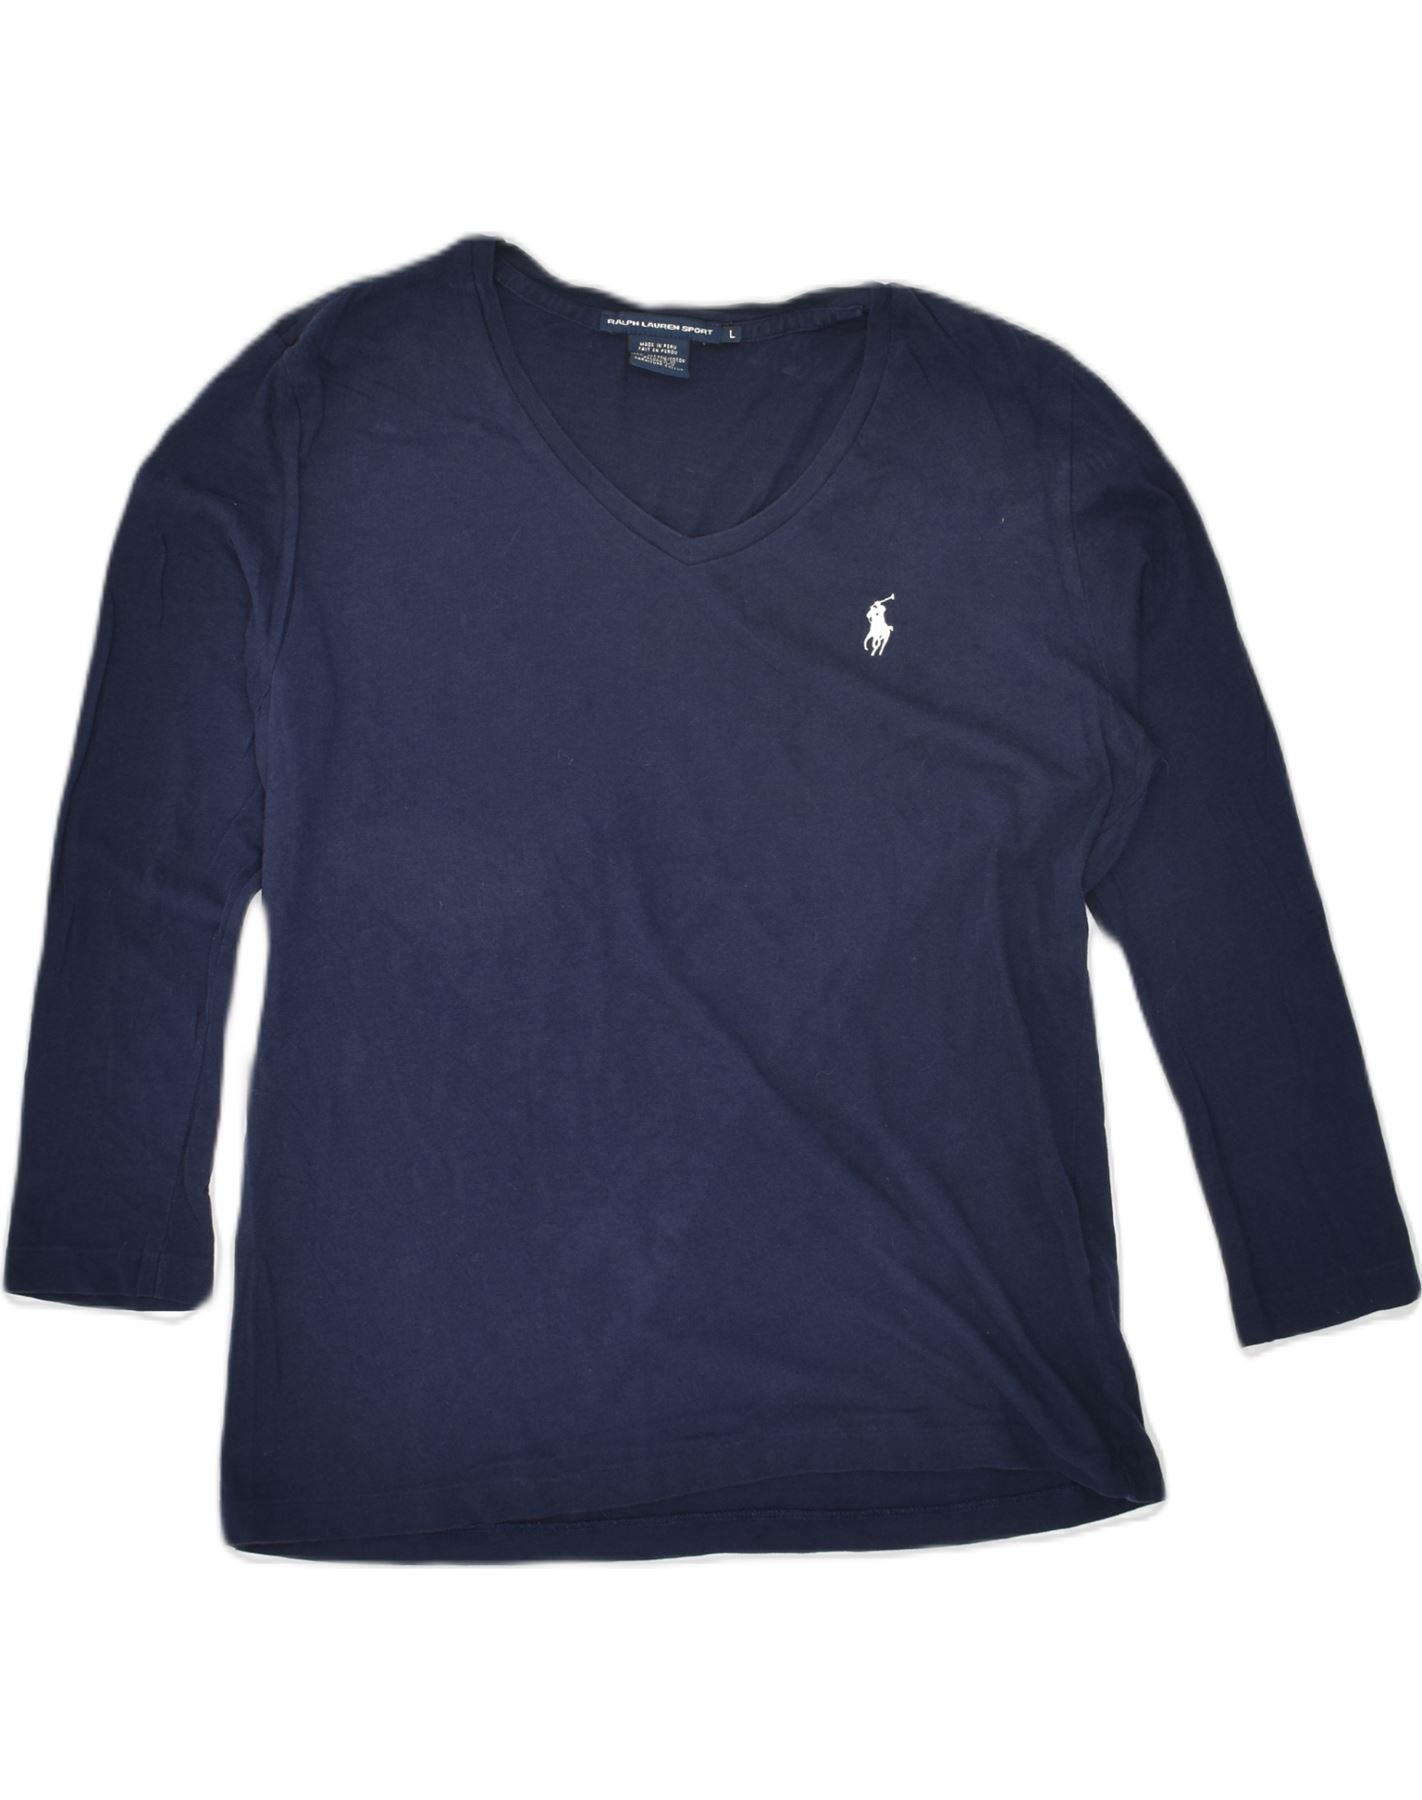 RALPH LAUREN POLO SPORT Womens Top 3/4 Sleeve UK 14 Large Navy Blue Cotton, Vintage & Second-Hand Clothing Online